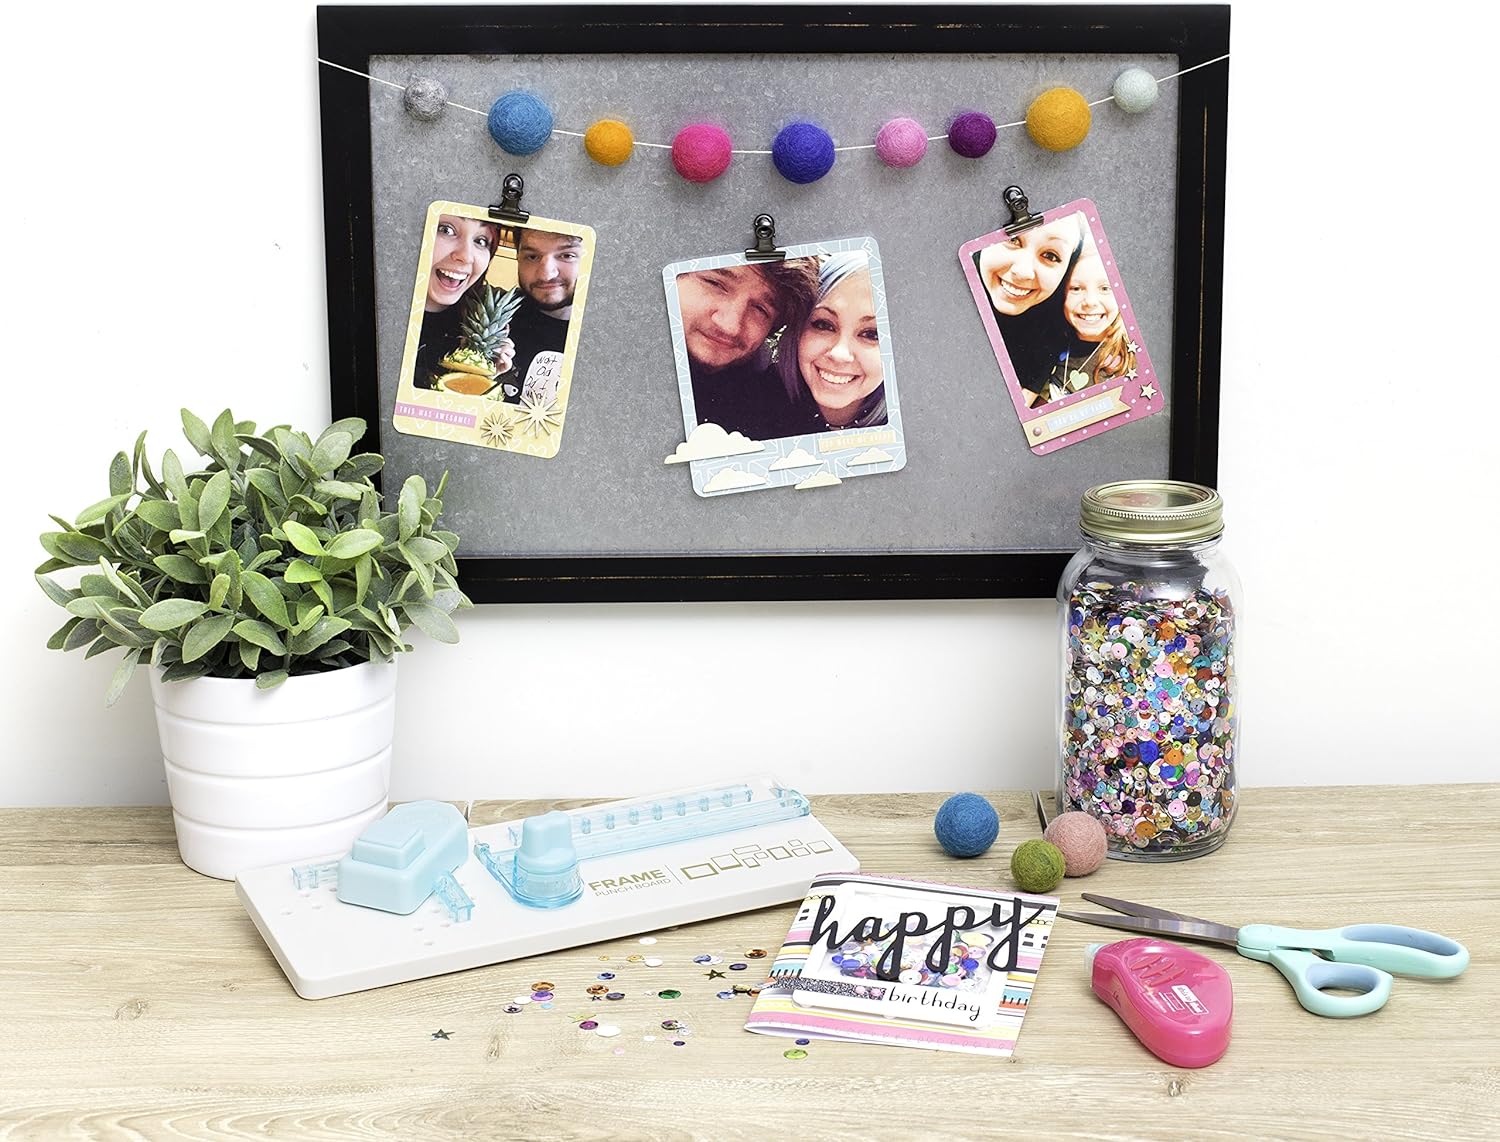 Lifestyle image of decorations created by using the We R Makers Frame Punch Board.